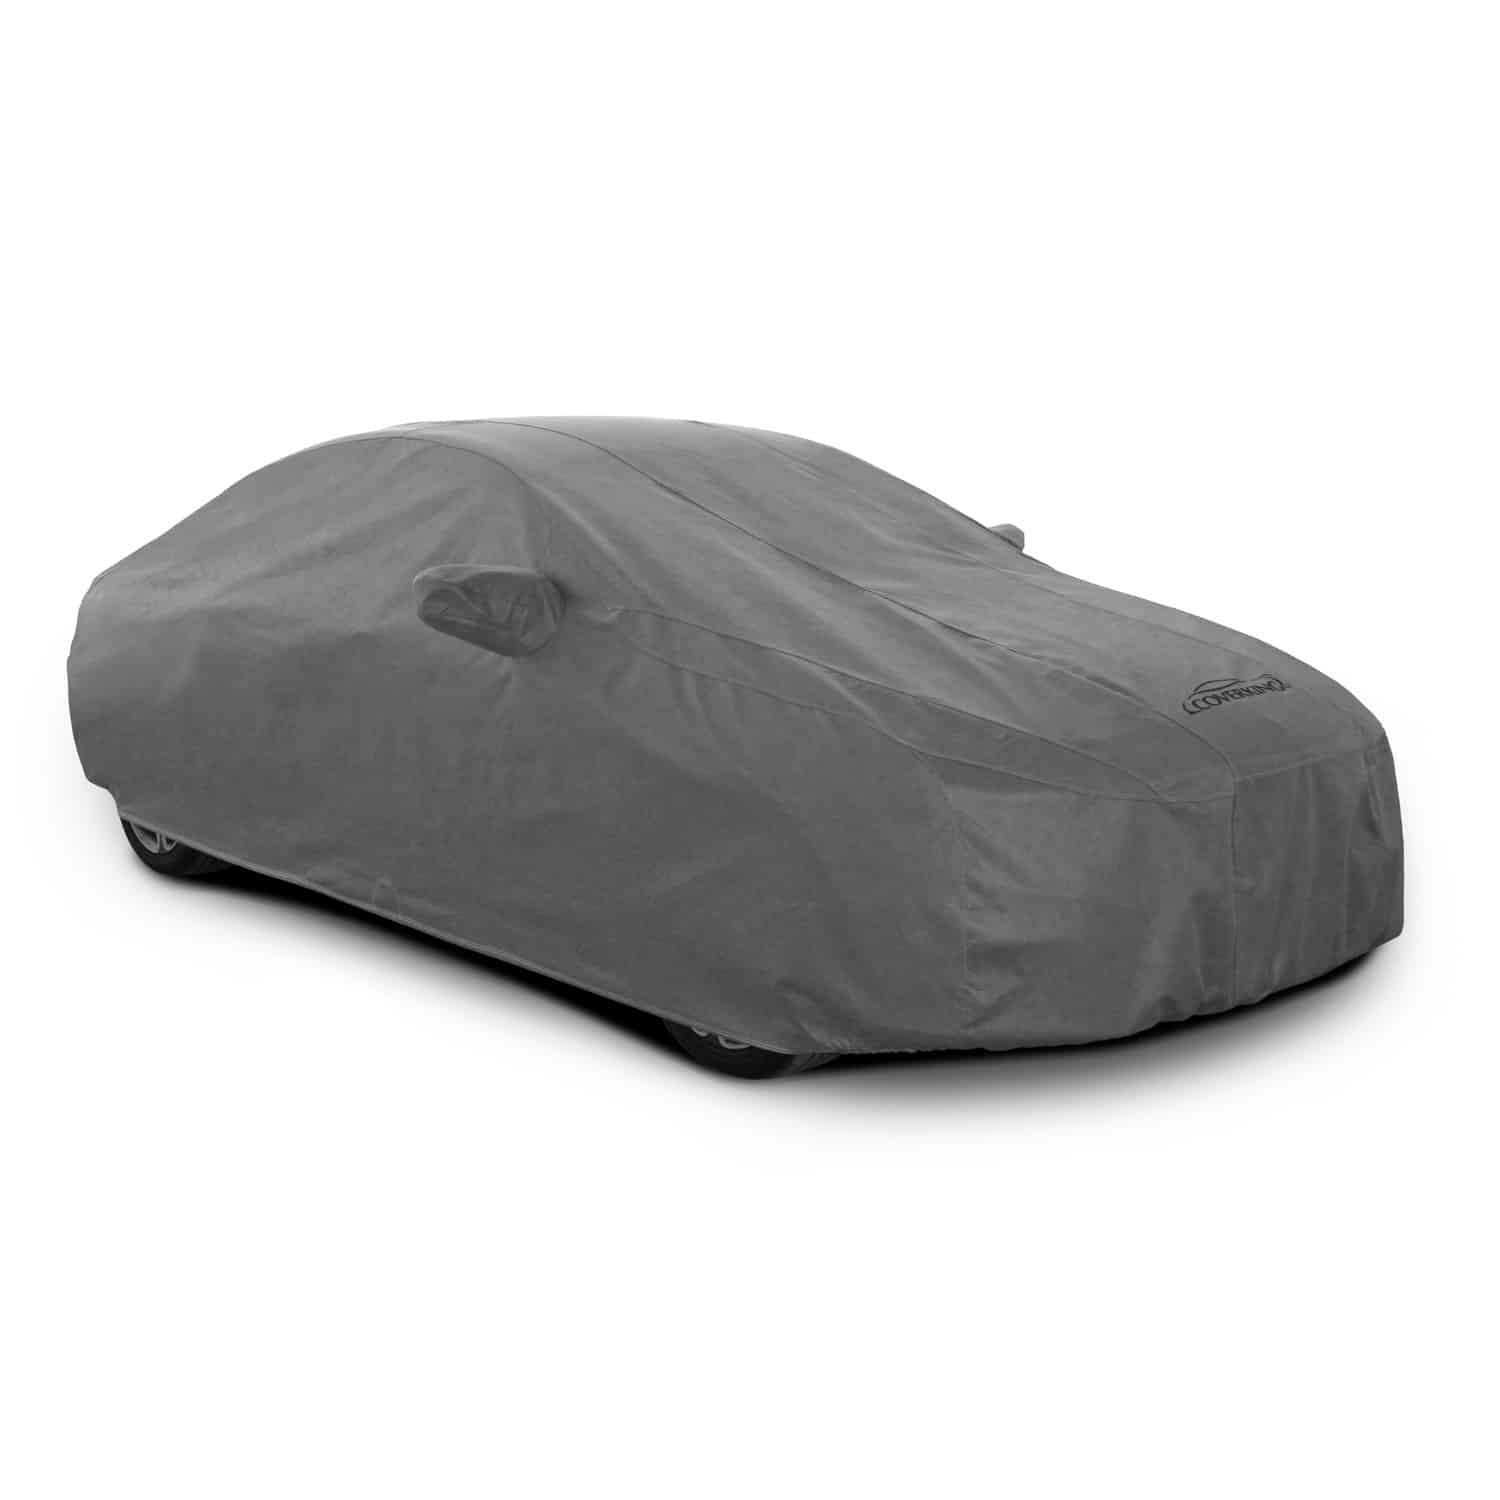 20162018 Camaro CoverKing Coverbond 4 Outdoor Car Cover